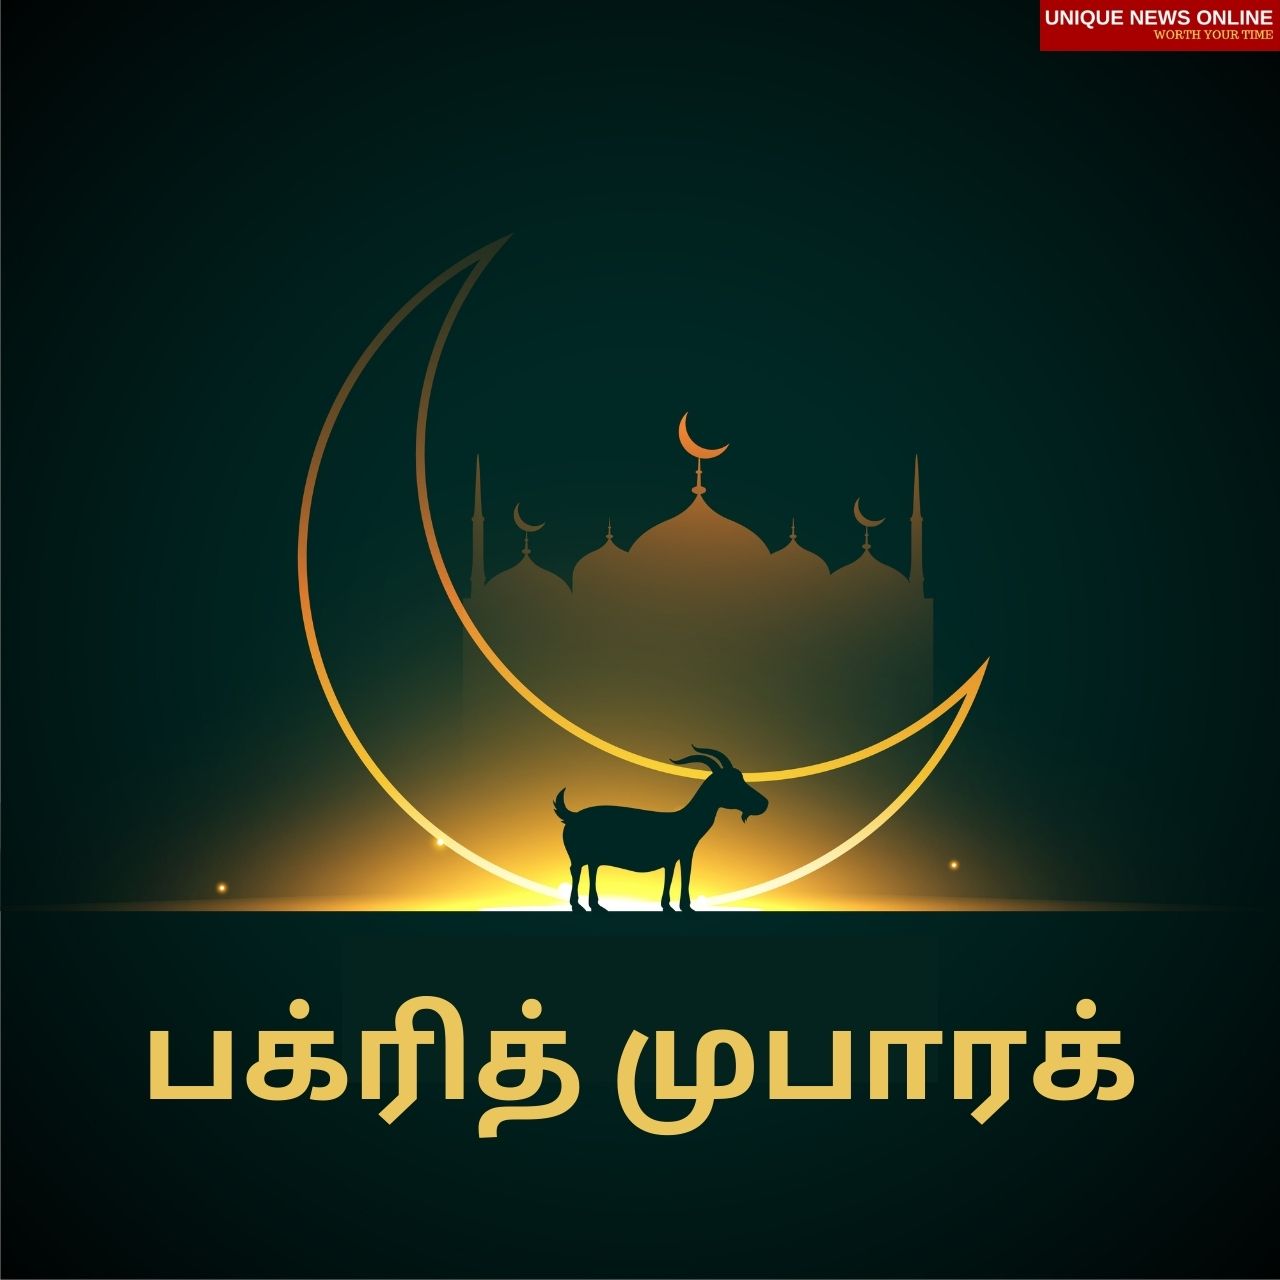 Bakrid Mubarak 2021 Tamil and Malayalam Wishes, Images, Quotes, Greetings, Status, Messages, and Dua to greet your Friend, Relative, or Loved Ones on Eid ul Adha